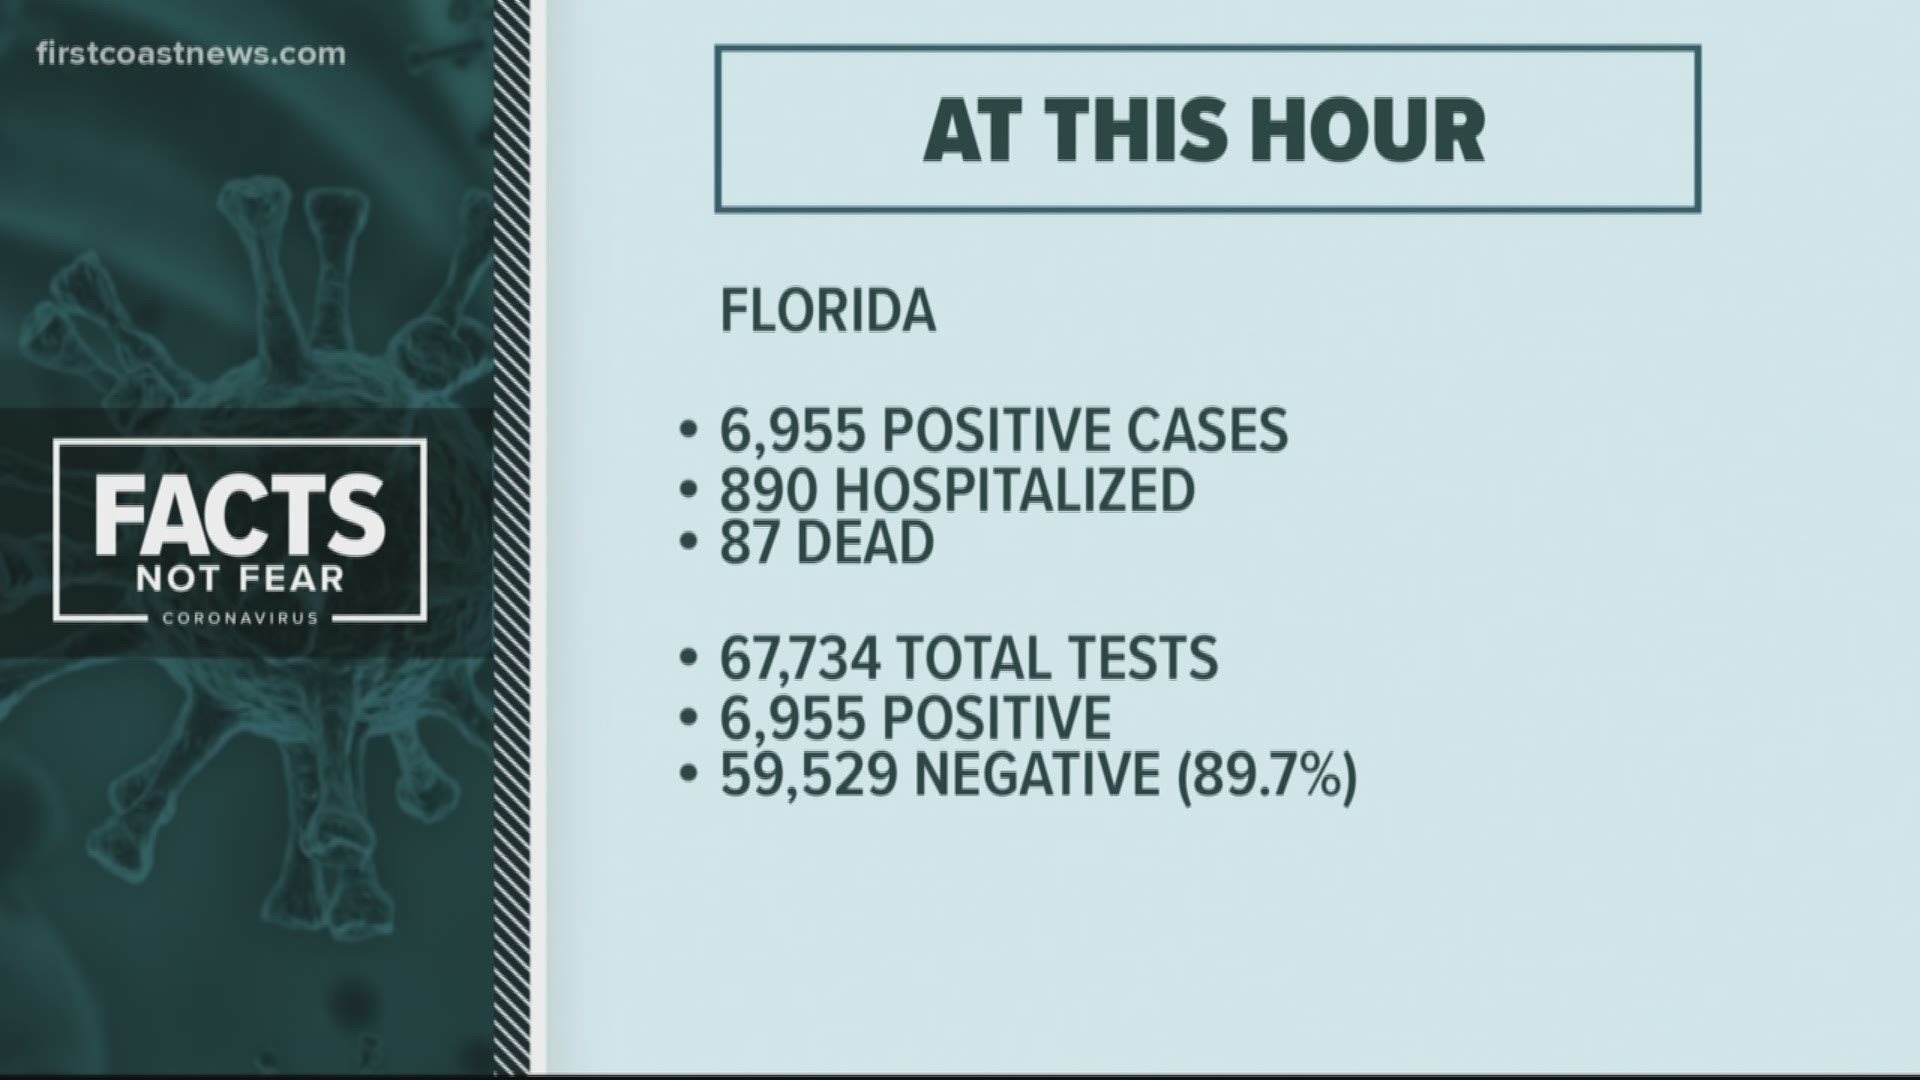 For the latest updates on the virus on the First Coast, follow our live blog and join our Facebook group, Facts Not Fear: Your Coronavirus Questions Answered.